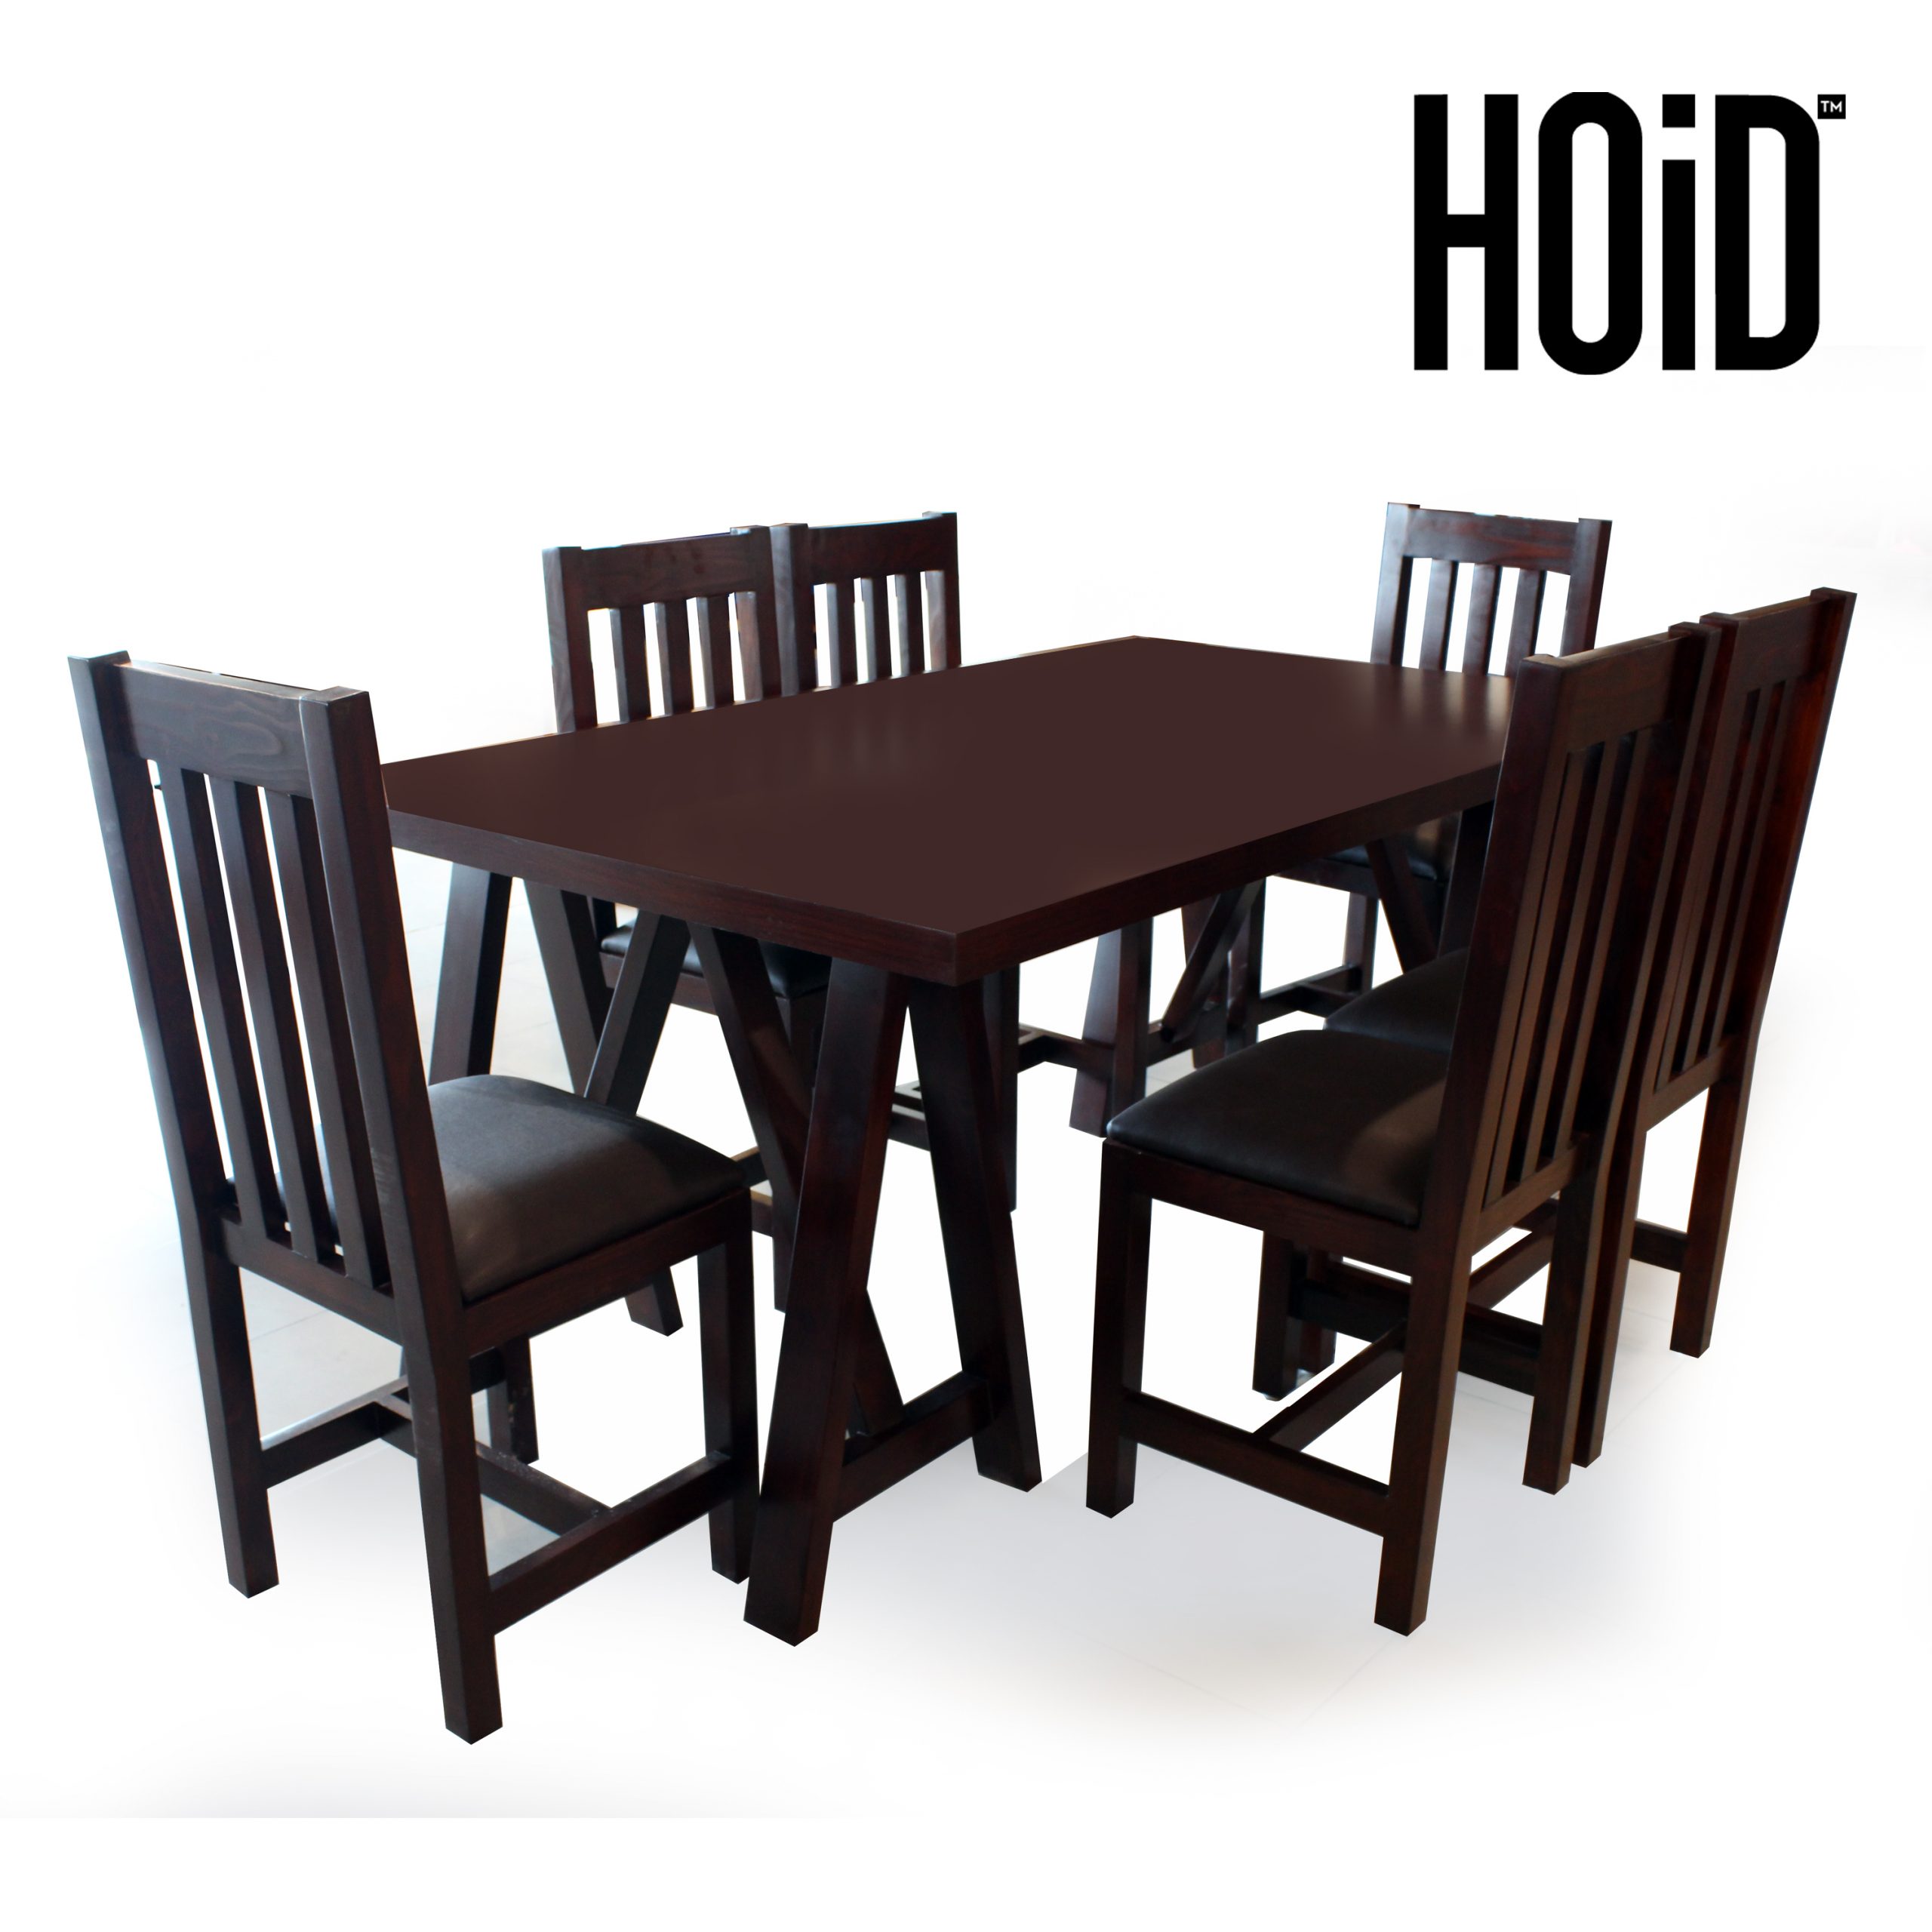 Largo Dining Table With 6 Chairs in size 3000 X 3000